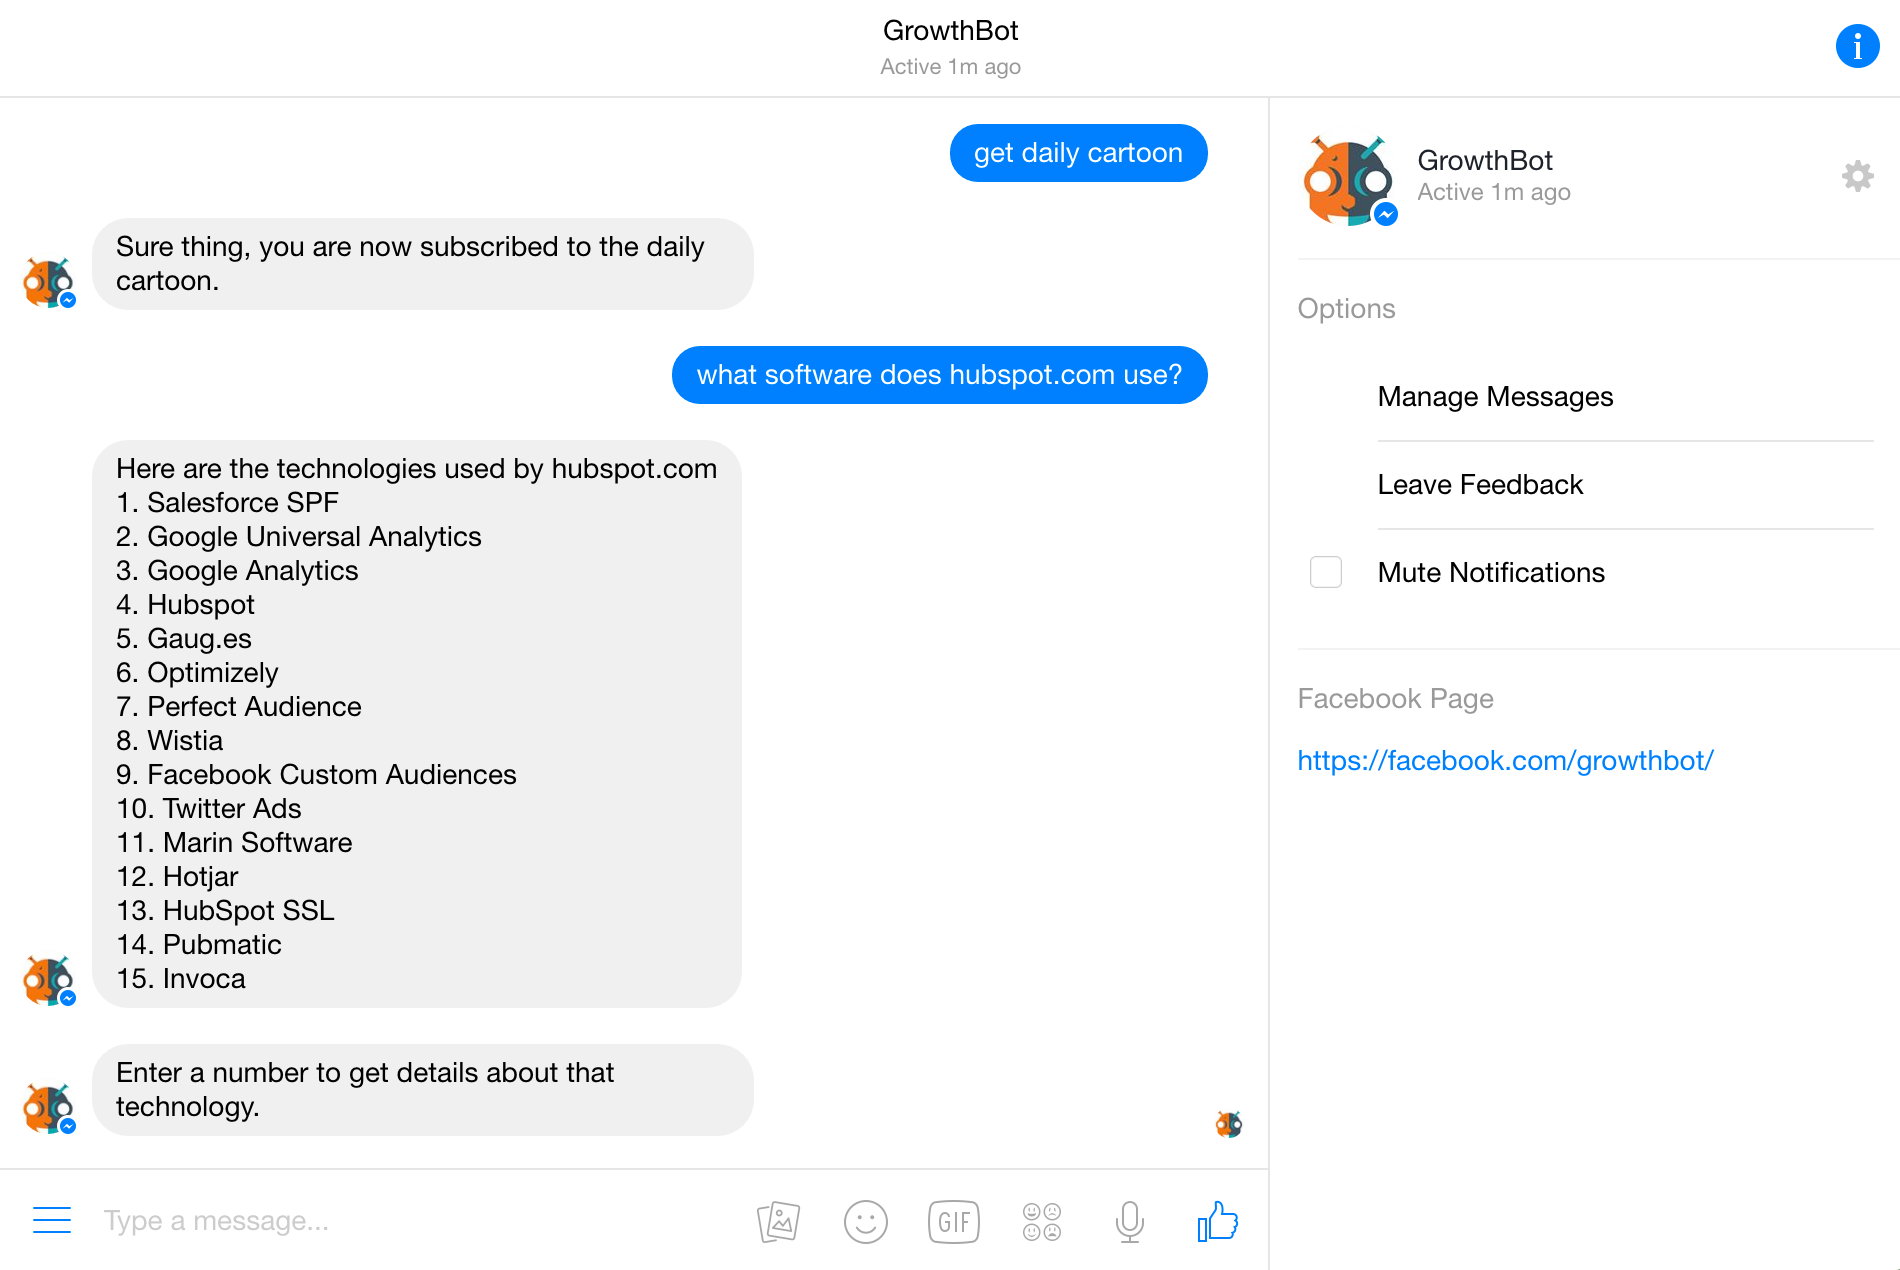 screenshot of growthbot, one of the most powerful chatbots for entrepreneurs